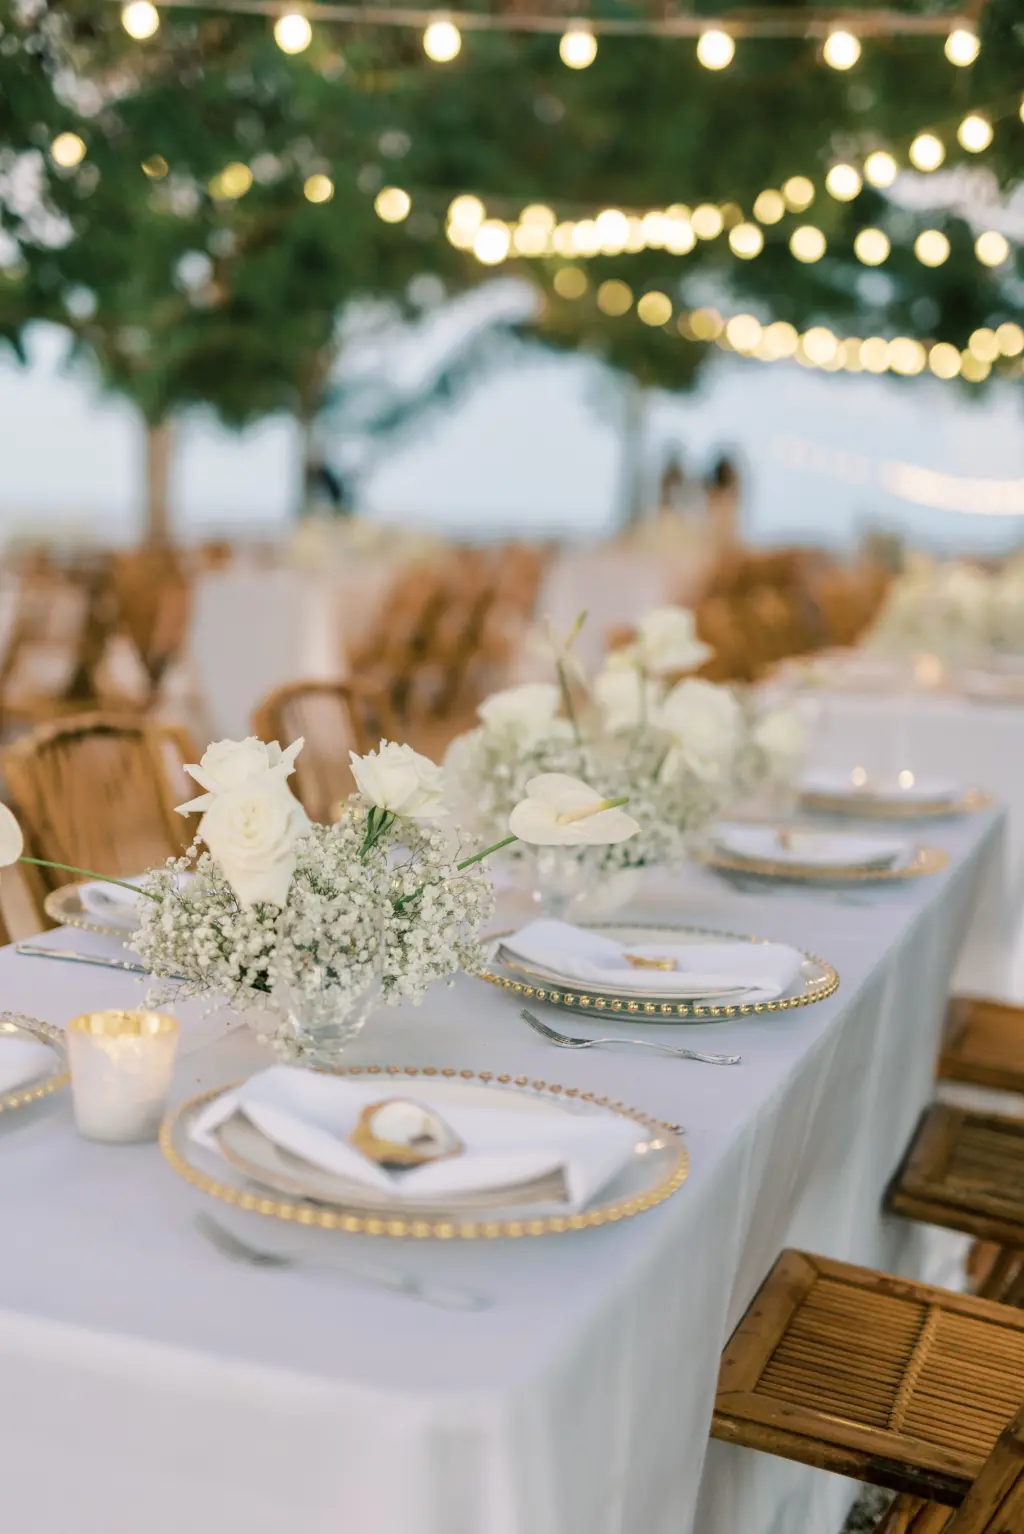 Elegant Coastal Light Blue and Cream Wedding Reception Decor Inspiration | Gold Beaded Chargers | White Roses and Baby's Breath Centerpiece Ideas